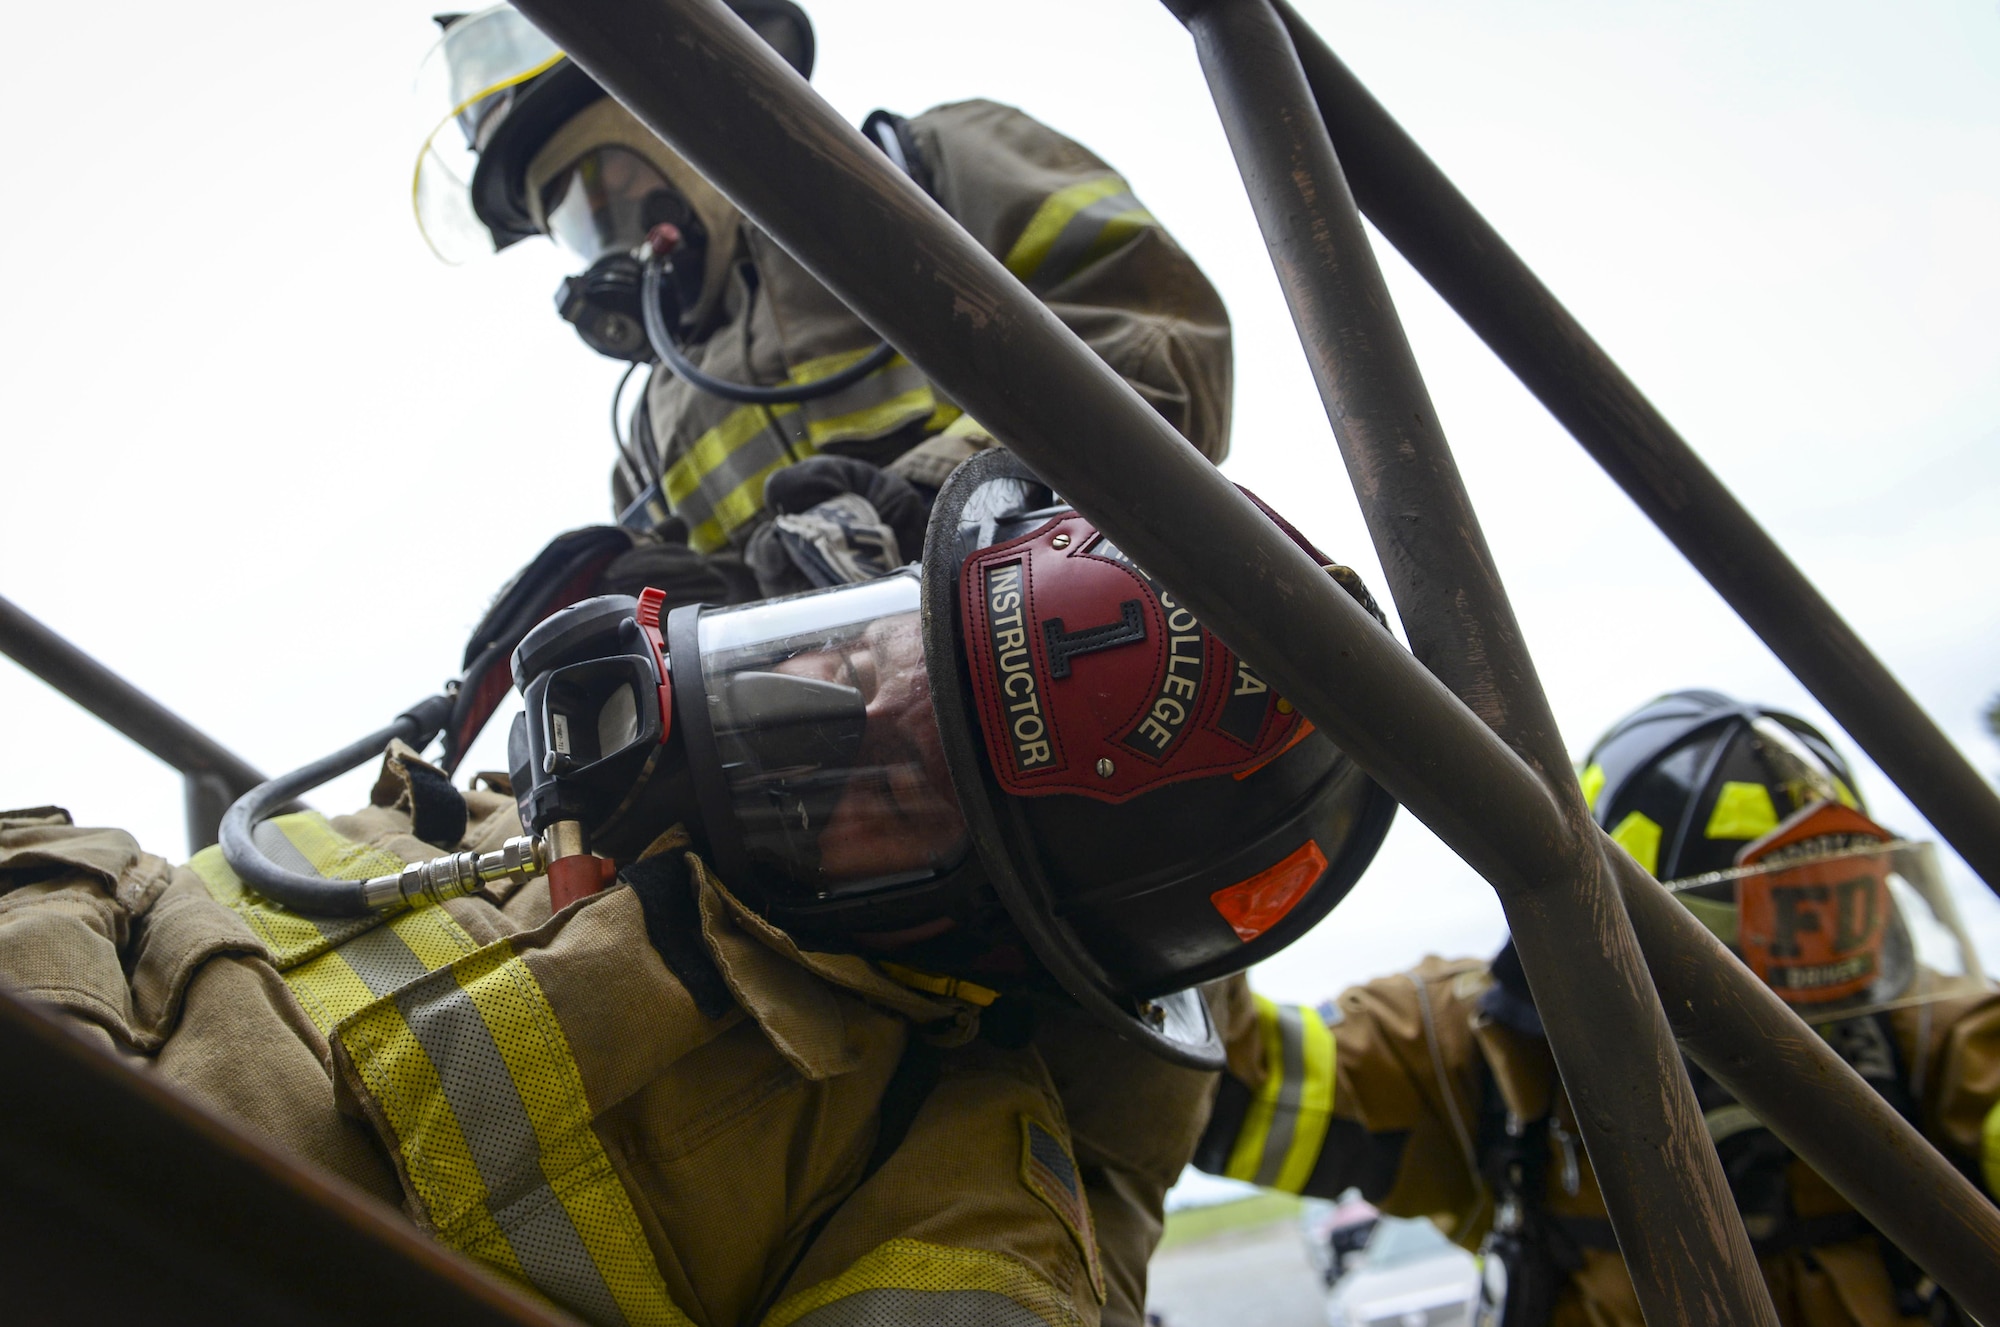 Firefighters from the 23d Civil Engineer Squadron carry a simulated victim down a staircase during rapid intervention fire training, Aug. 3, 2017, at Moody Air Force Base, Ga. Rapid intervention refers to the rescue of downed firefighters when they find themselves in trouble. During the course, Moody firefighters, as well as a Lowndes County firefighter, learned how to perform self-rescue, team rescue, and basic skills such as CPR and various carries in order to transport victims. (U.S. Air Force photo by Airman 1st Class Lauren M. Sprunk)